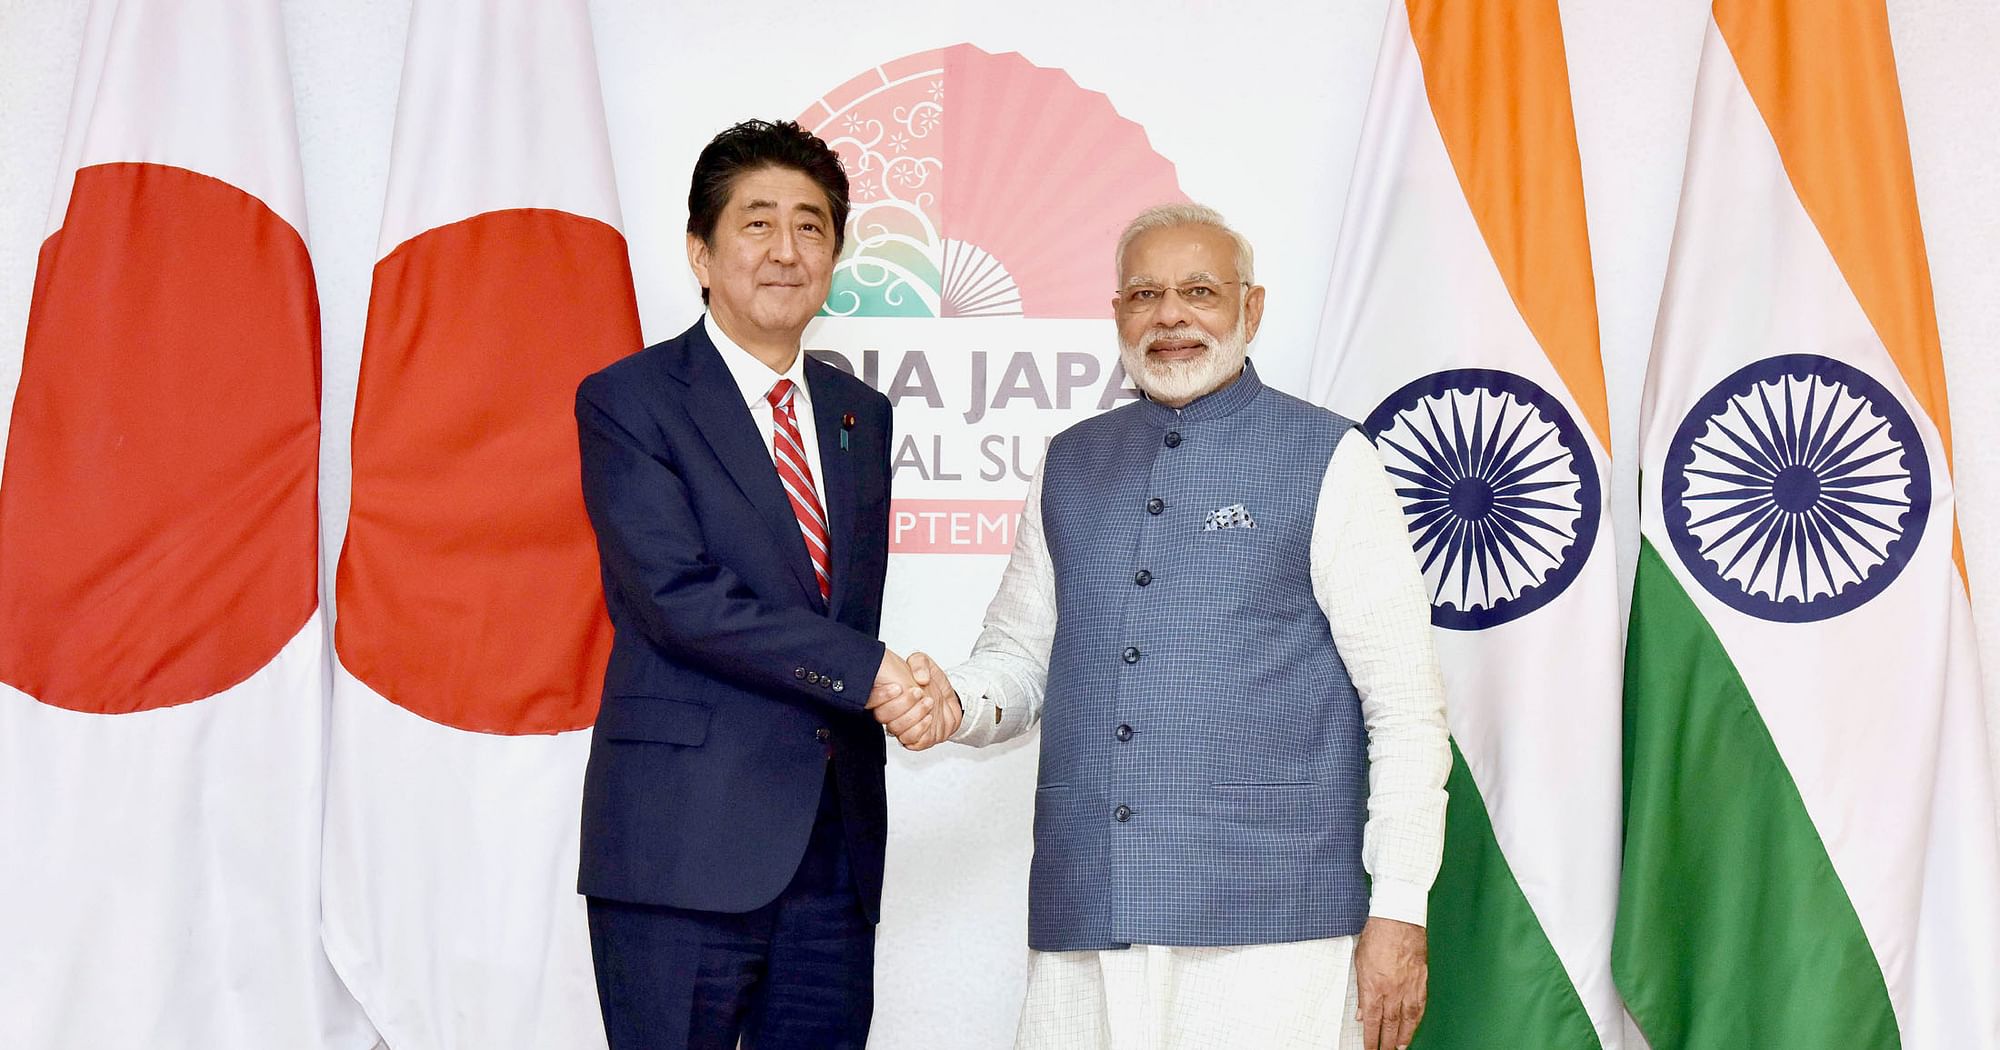 PM Modi To Attend Shinzo Abe’s Funeral On Sept. 27 In Japan